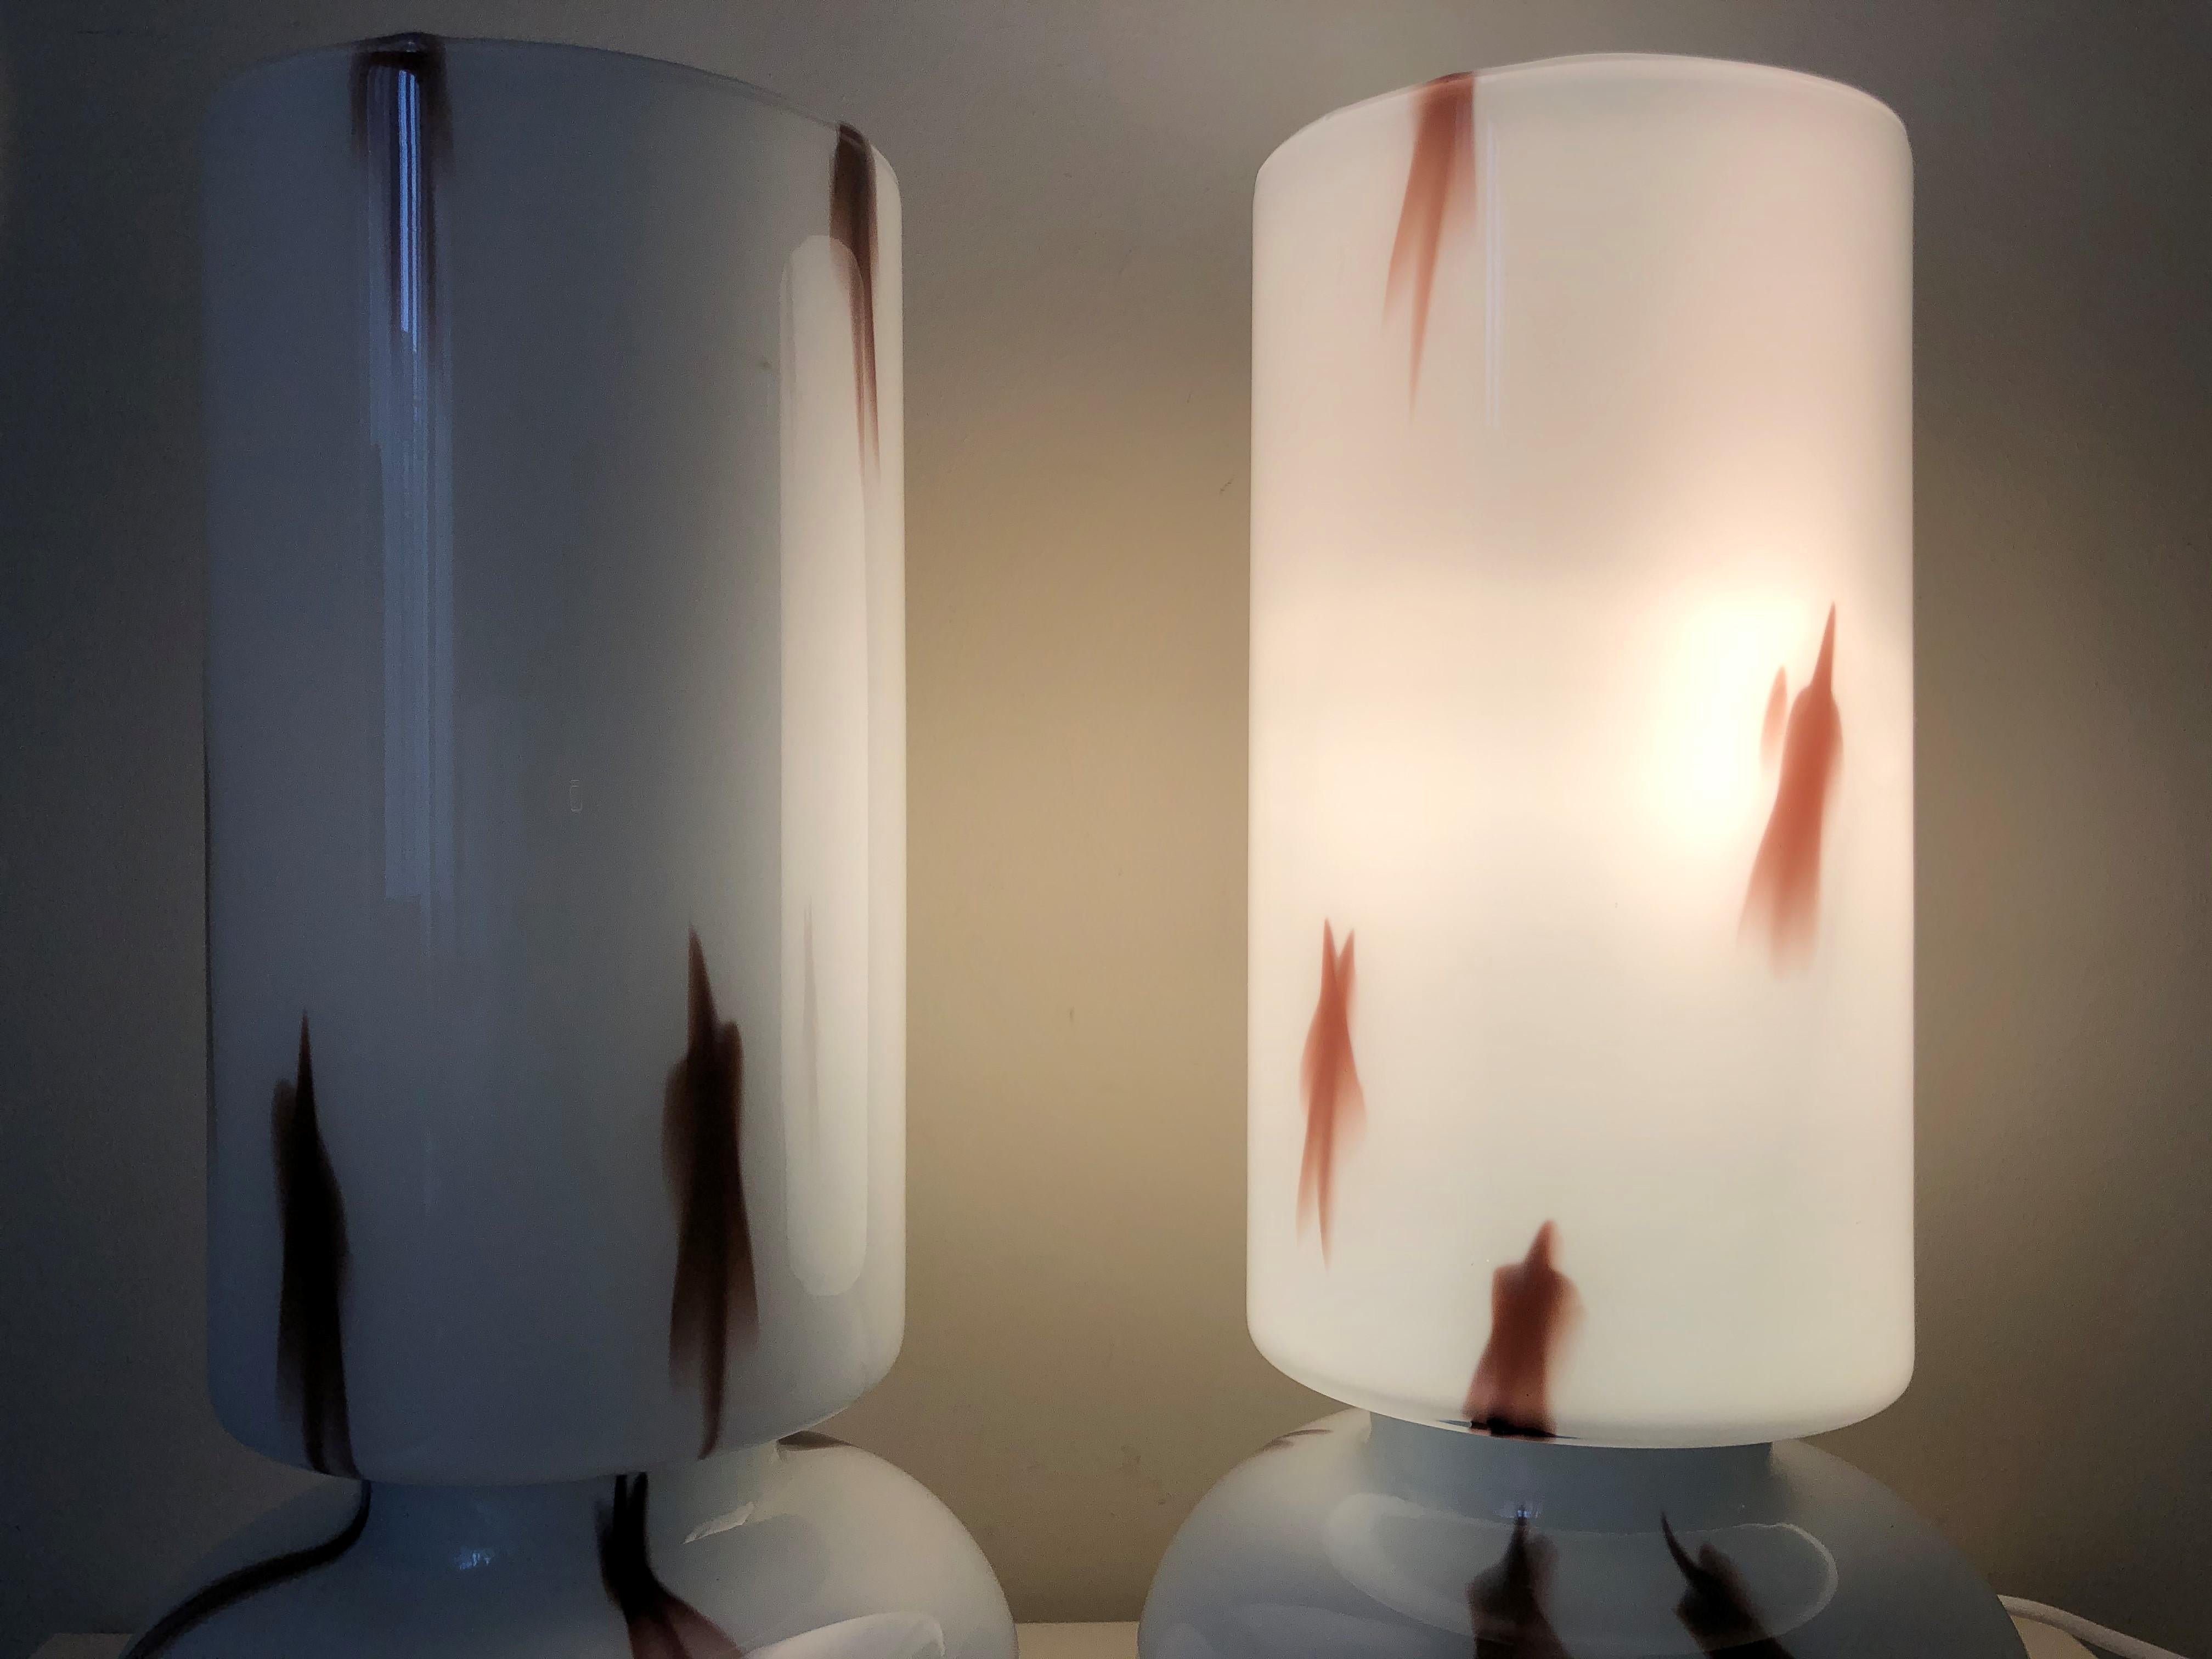 Spanish Pair of Mid Century Opaline Glass Table Lamps by Fiamma S.A. Barcelona, 1970s